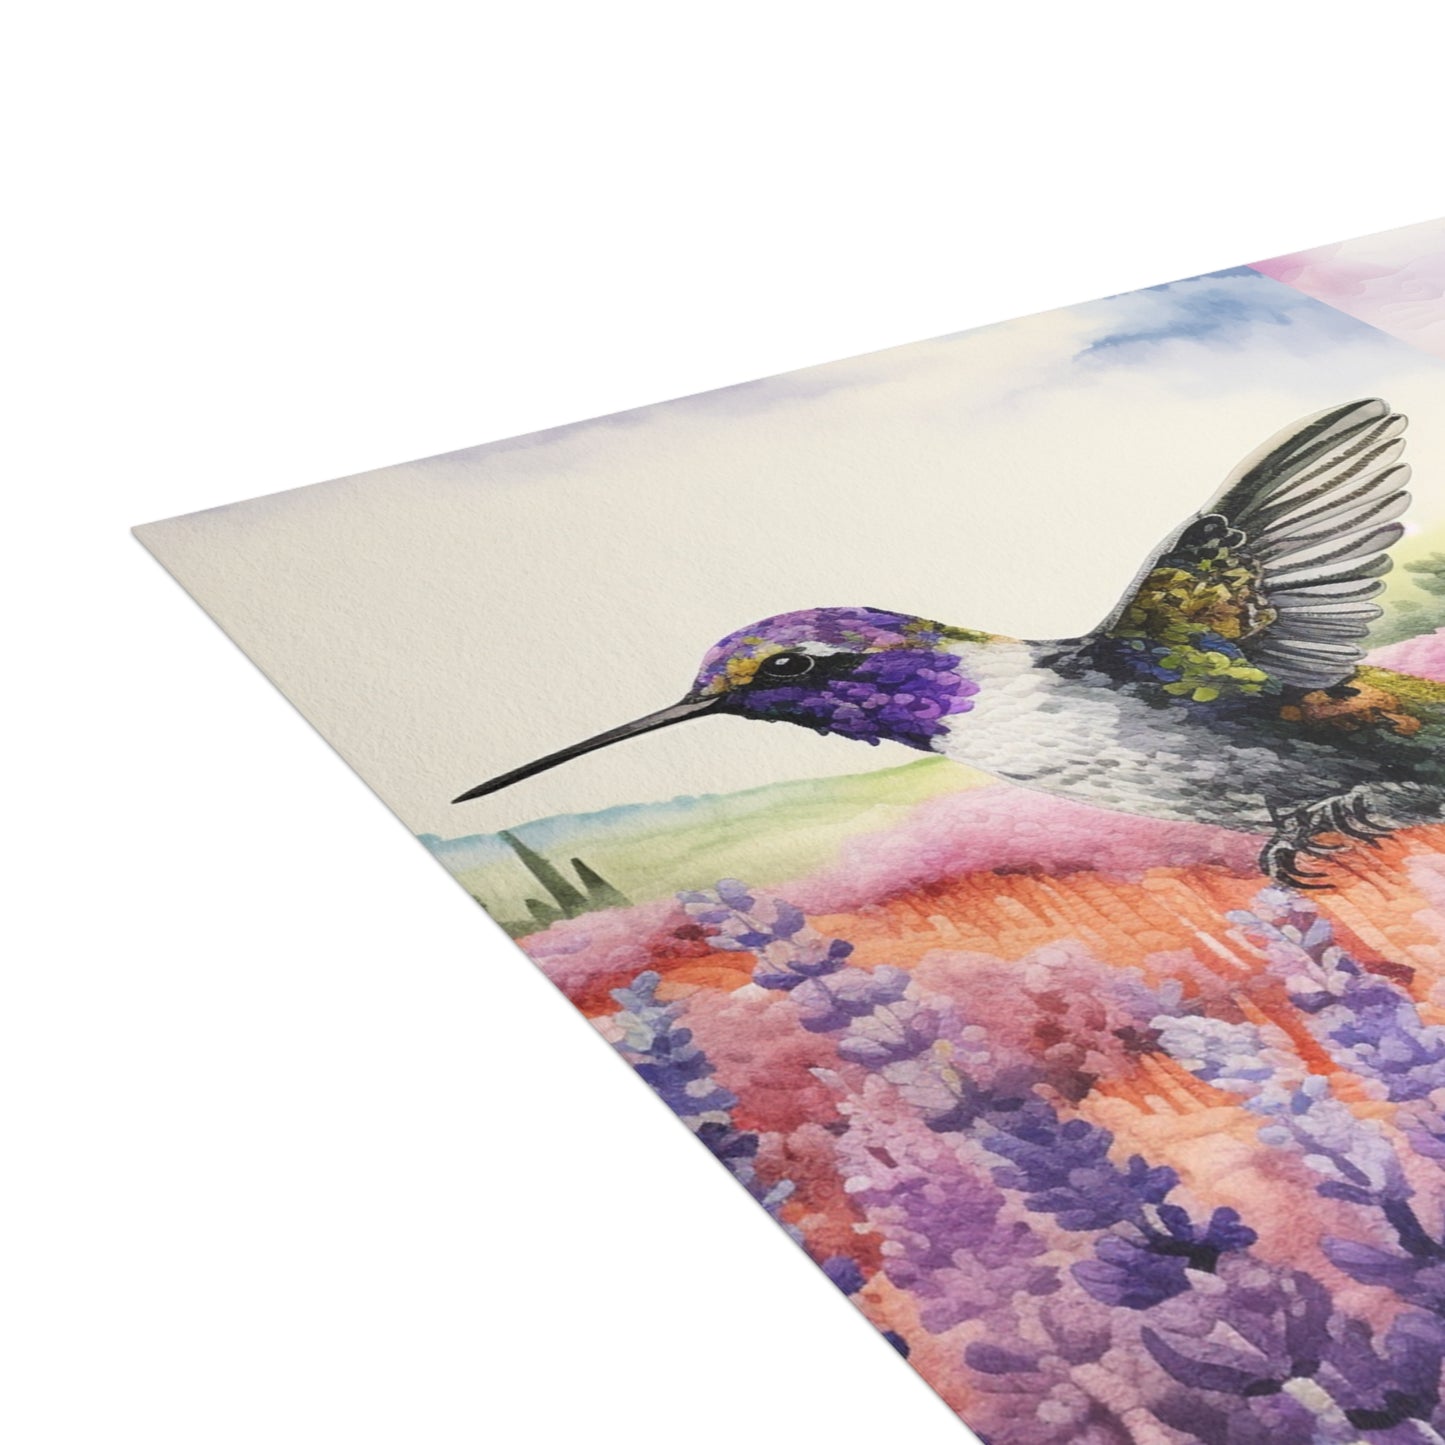 Threaded Wings: A humming's birds dance in a lavender field - Greeting Card